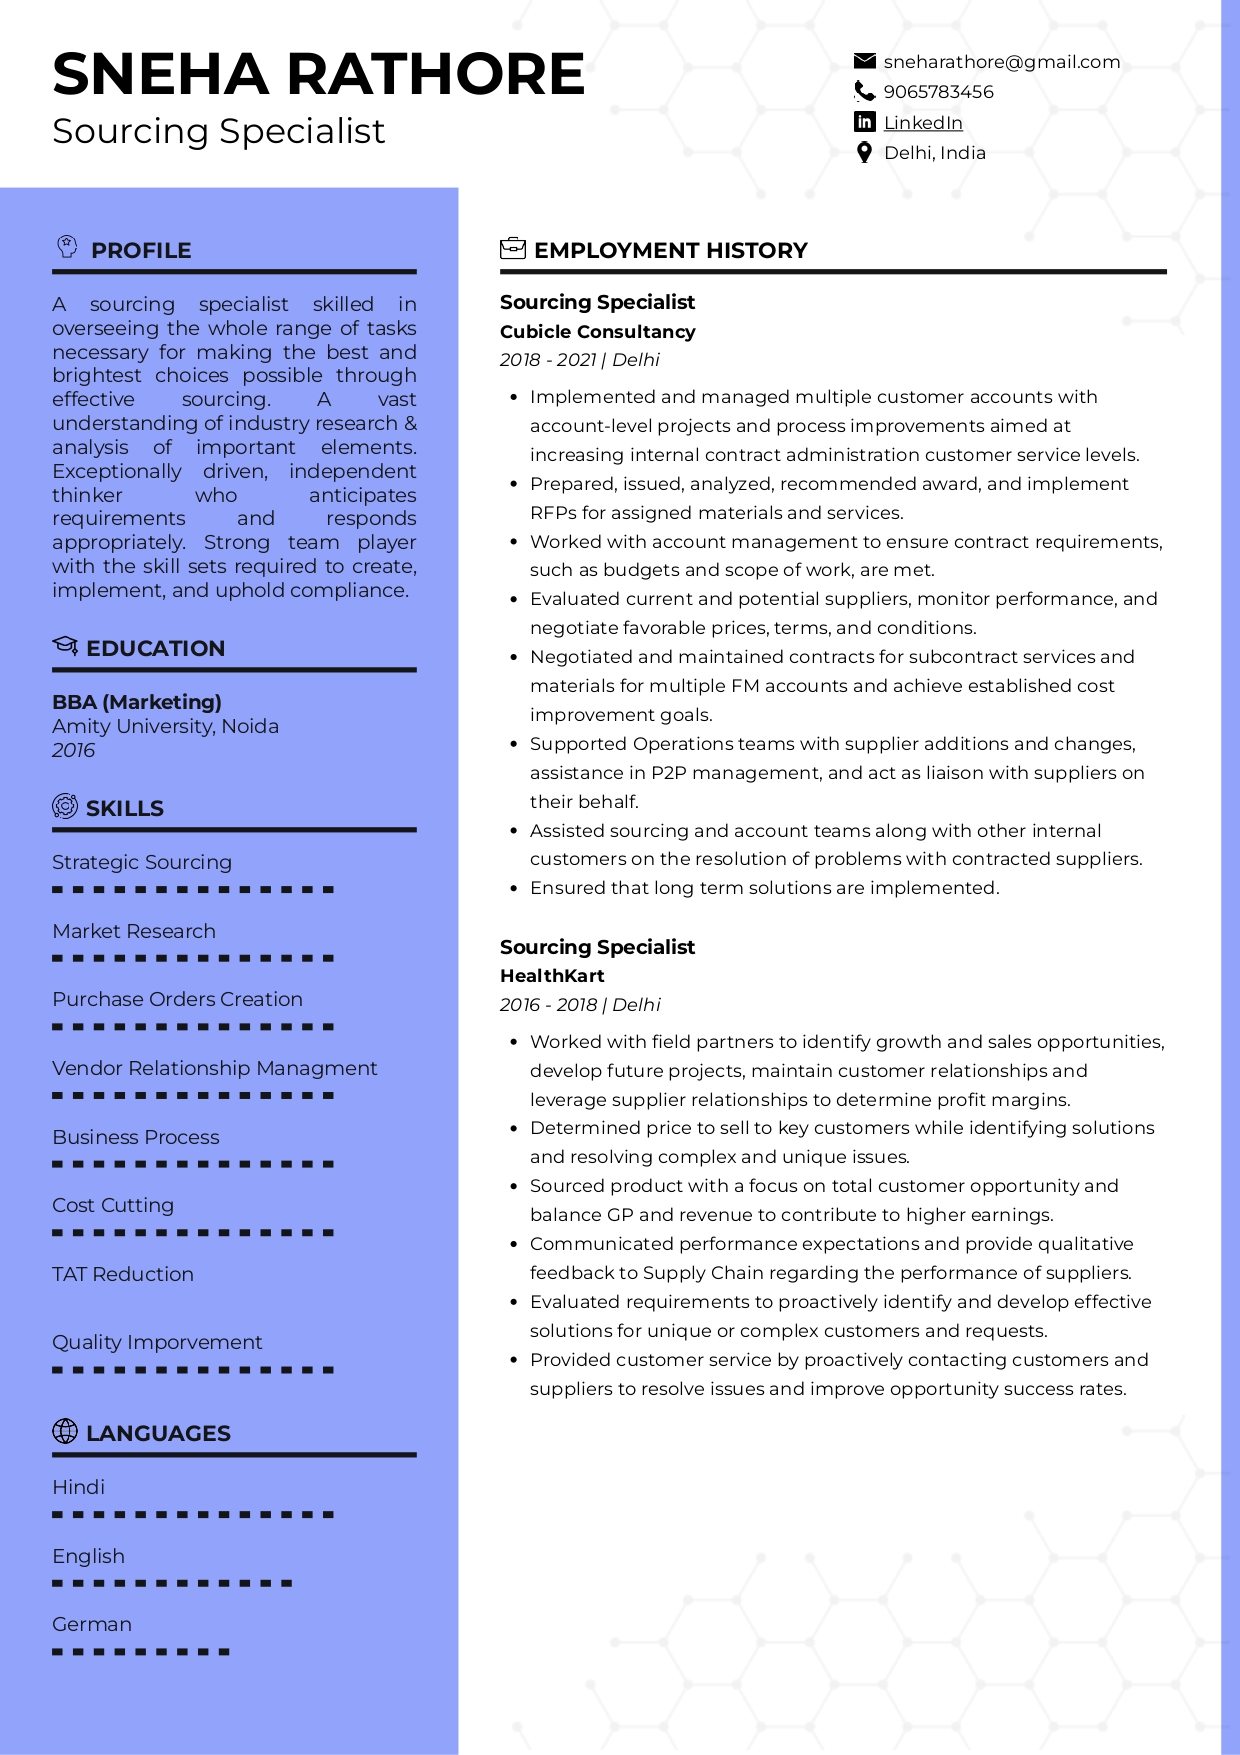 Sample Resume of Sourcing Specialist | Free Resume Templates & Samples on Resumod.co